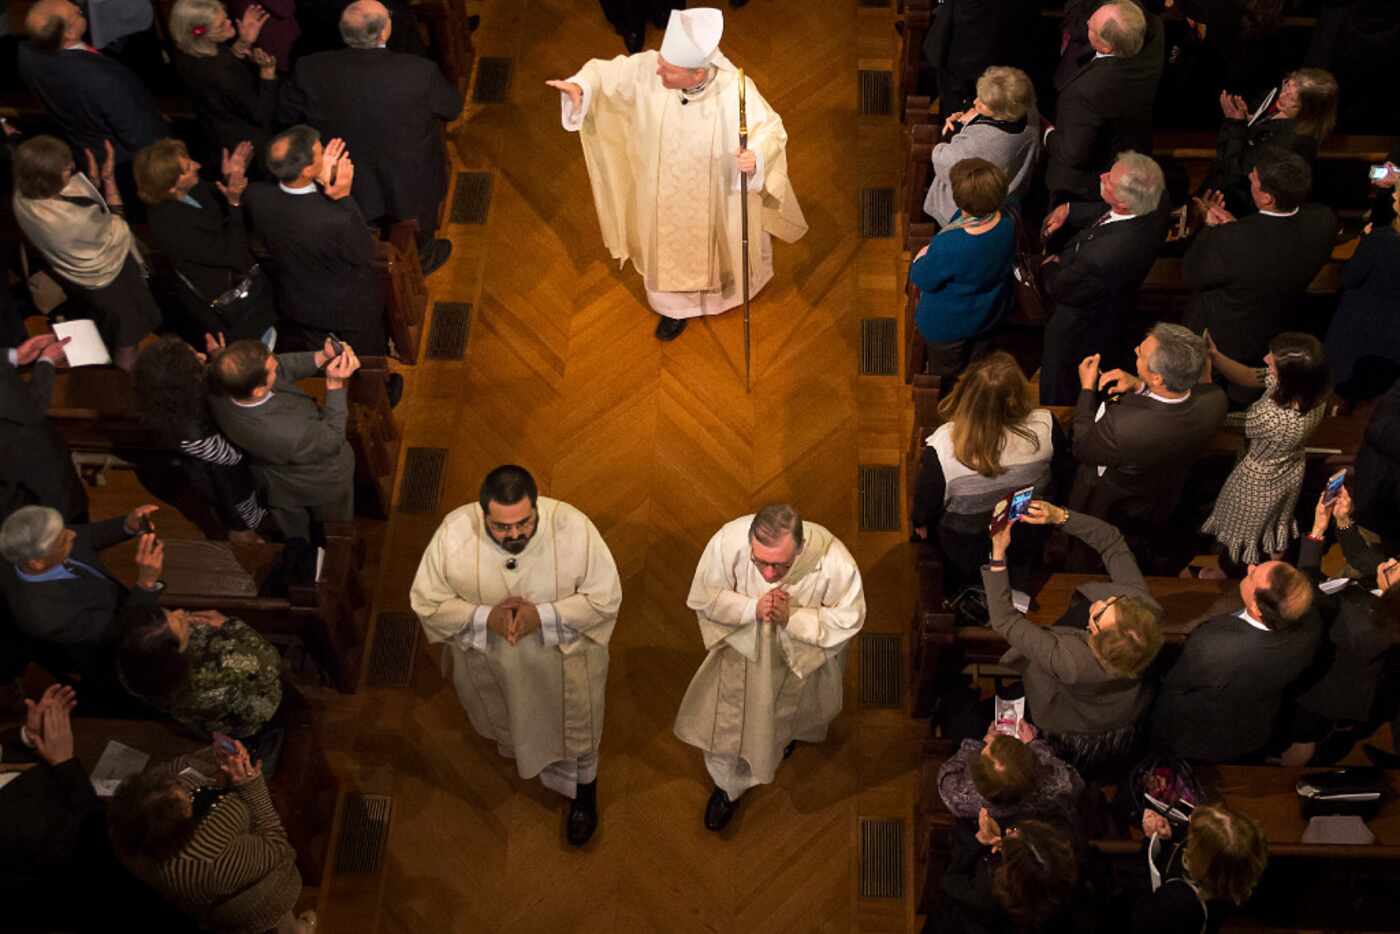 Bishop Edward J. Burns acknowledges the applause of worshipers as he processes from the...